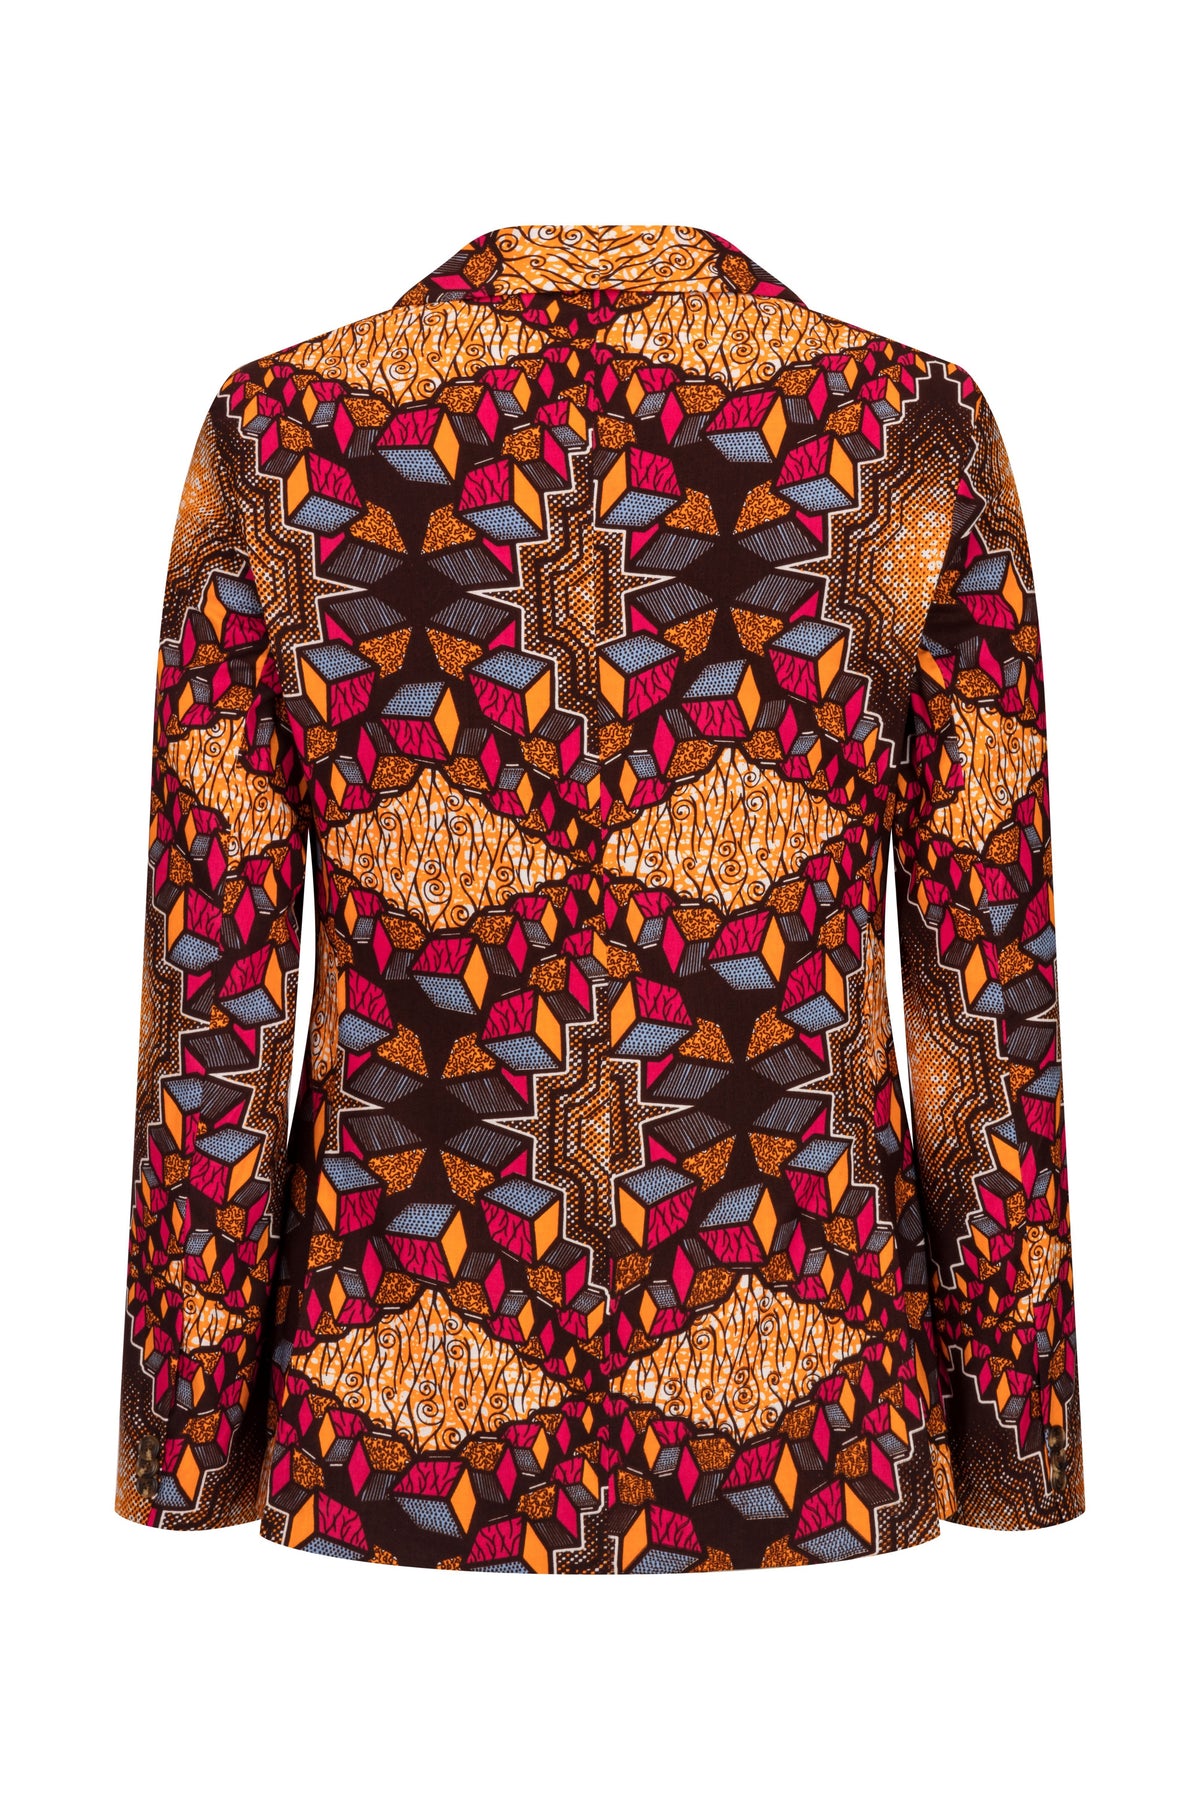 Joshua fitted African Print Blazer-Cubic - OHEMA OHENE AFRICAN INSPIRED FASHION